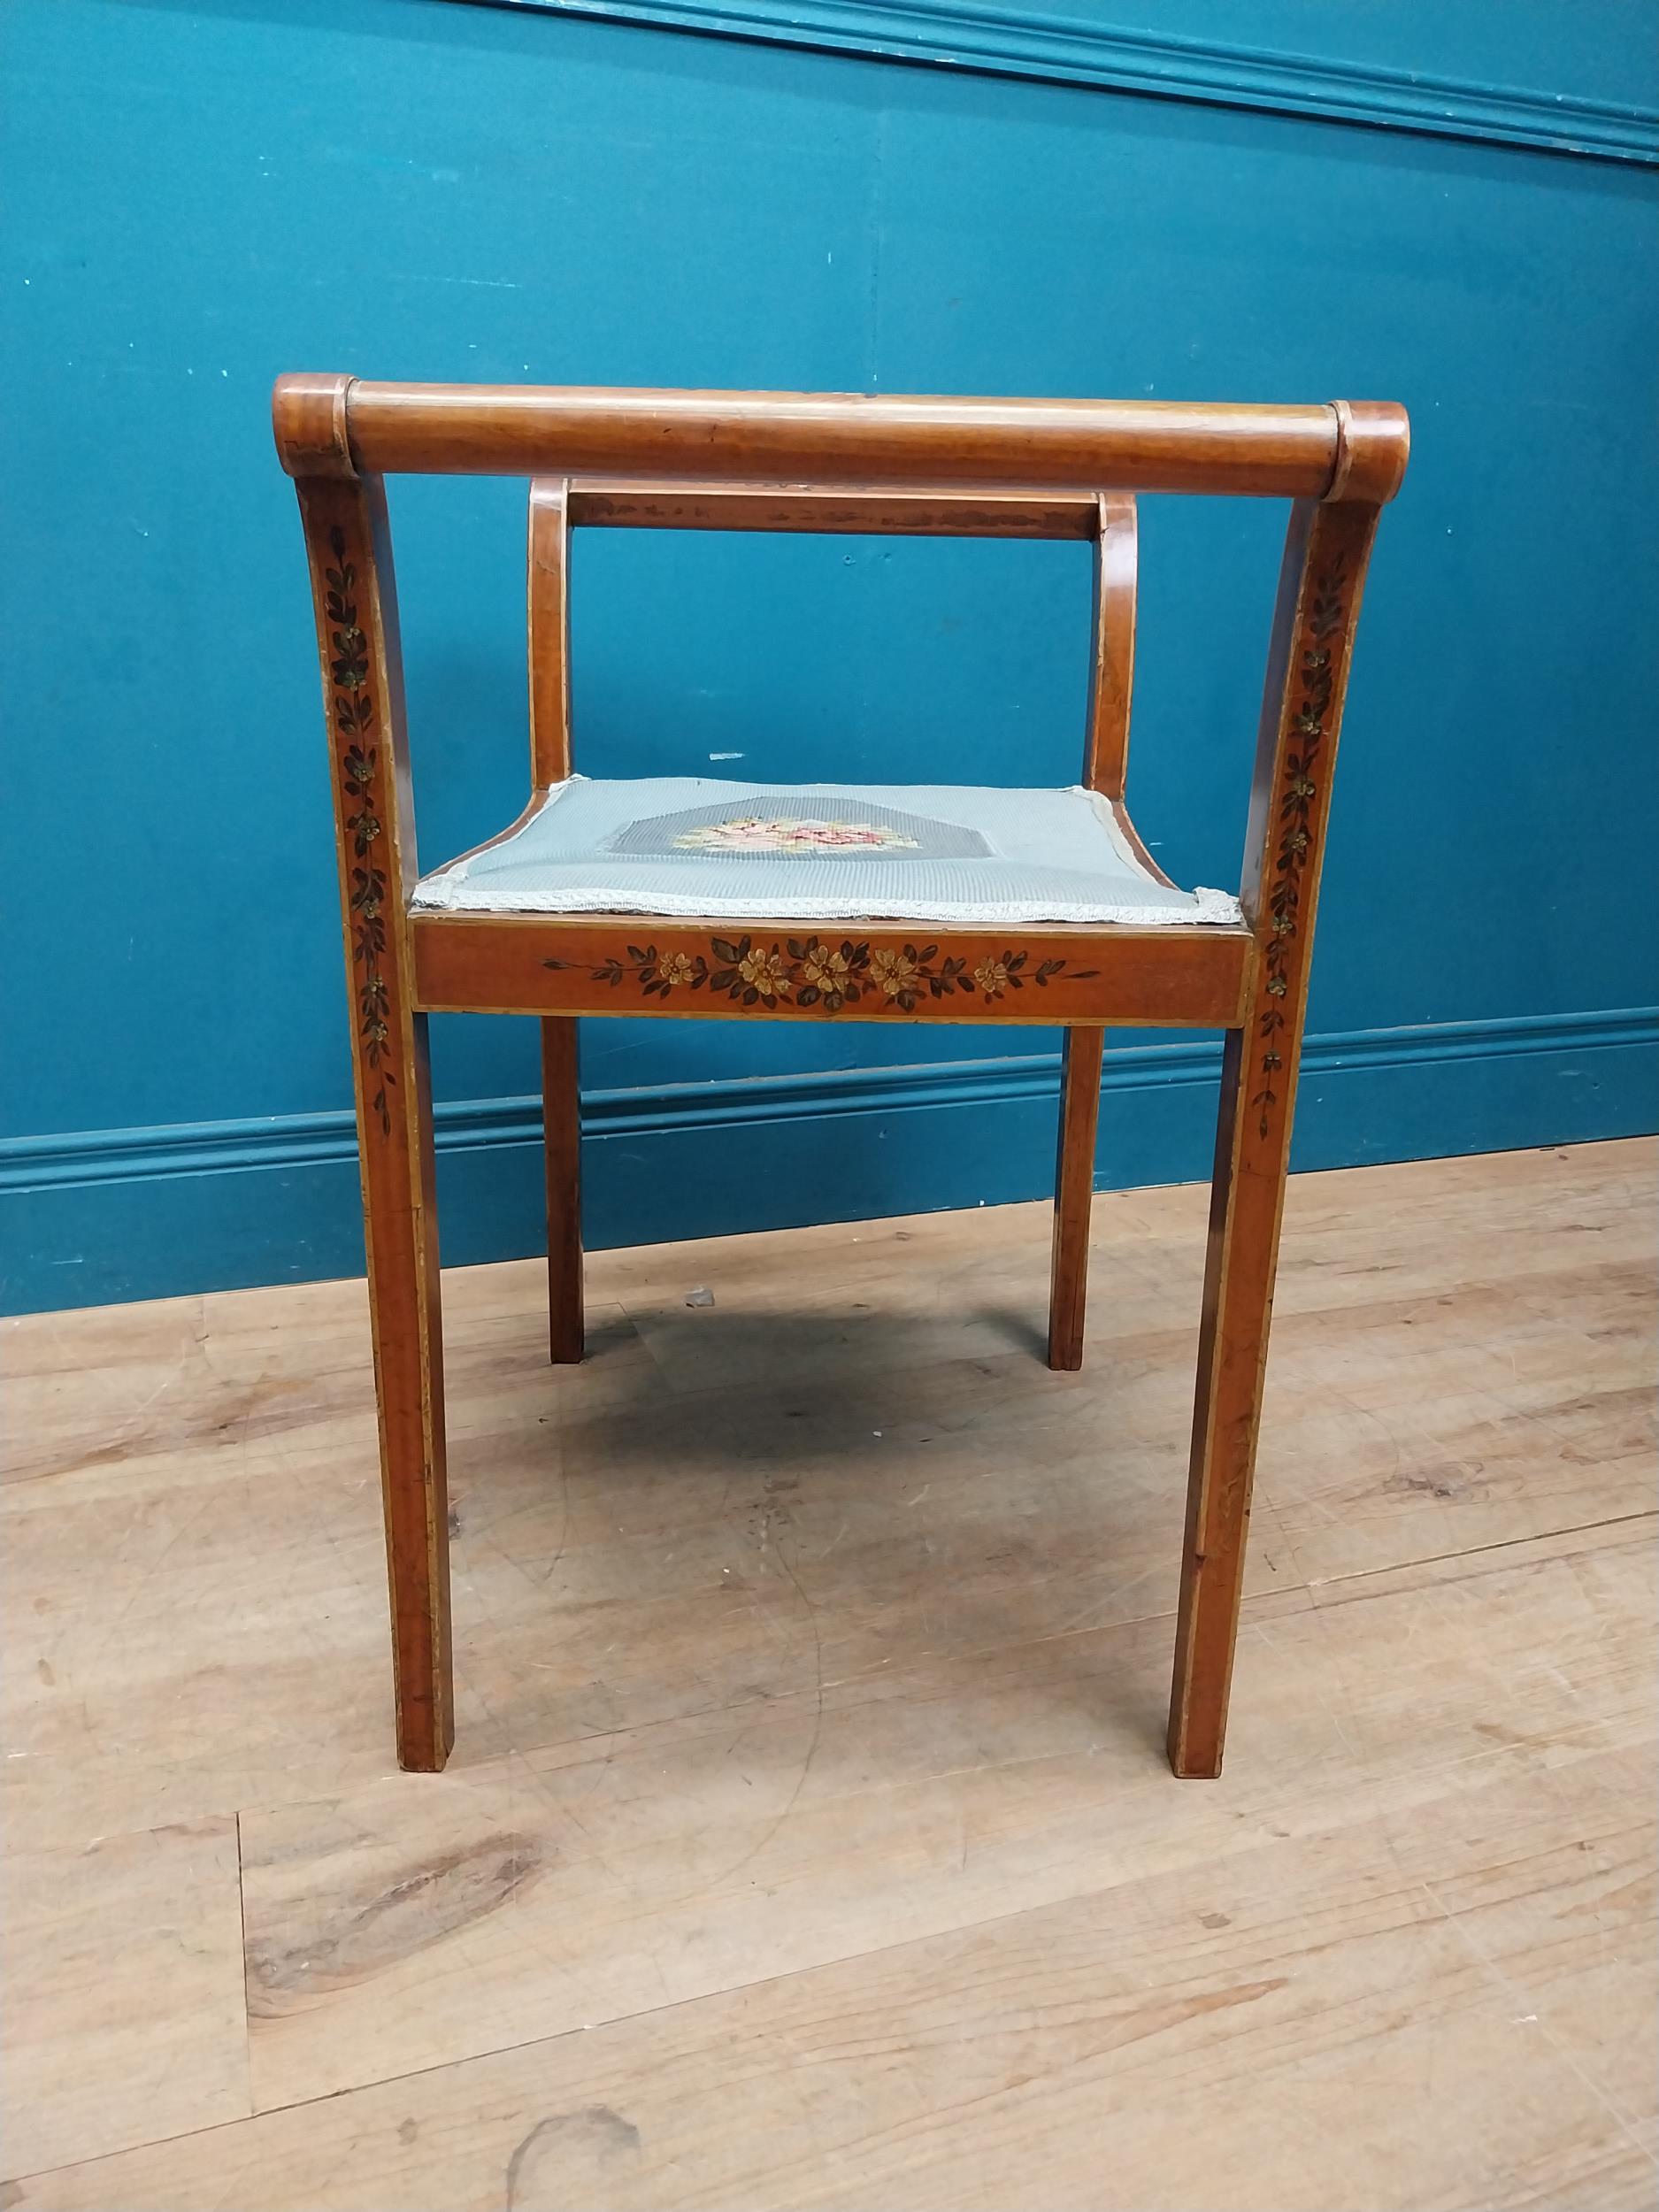 Edwardian satinwood stool with upholstered tapestry seat. {64 cm H x 60 cm W x 40 cm D}. - Image 5 of 5